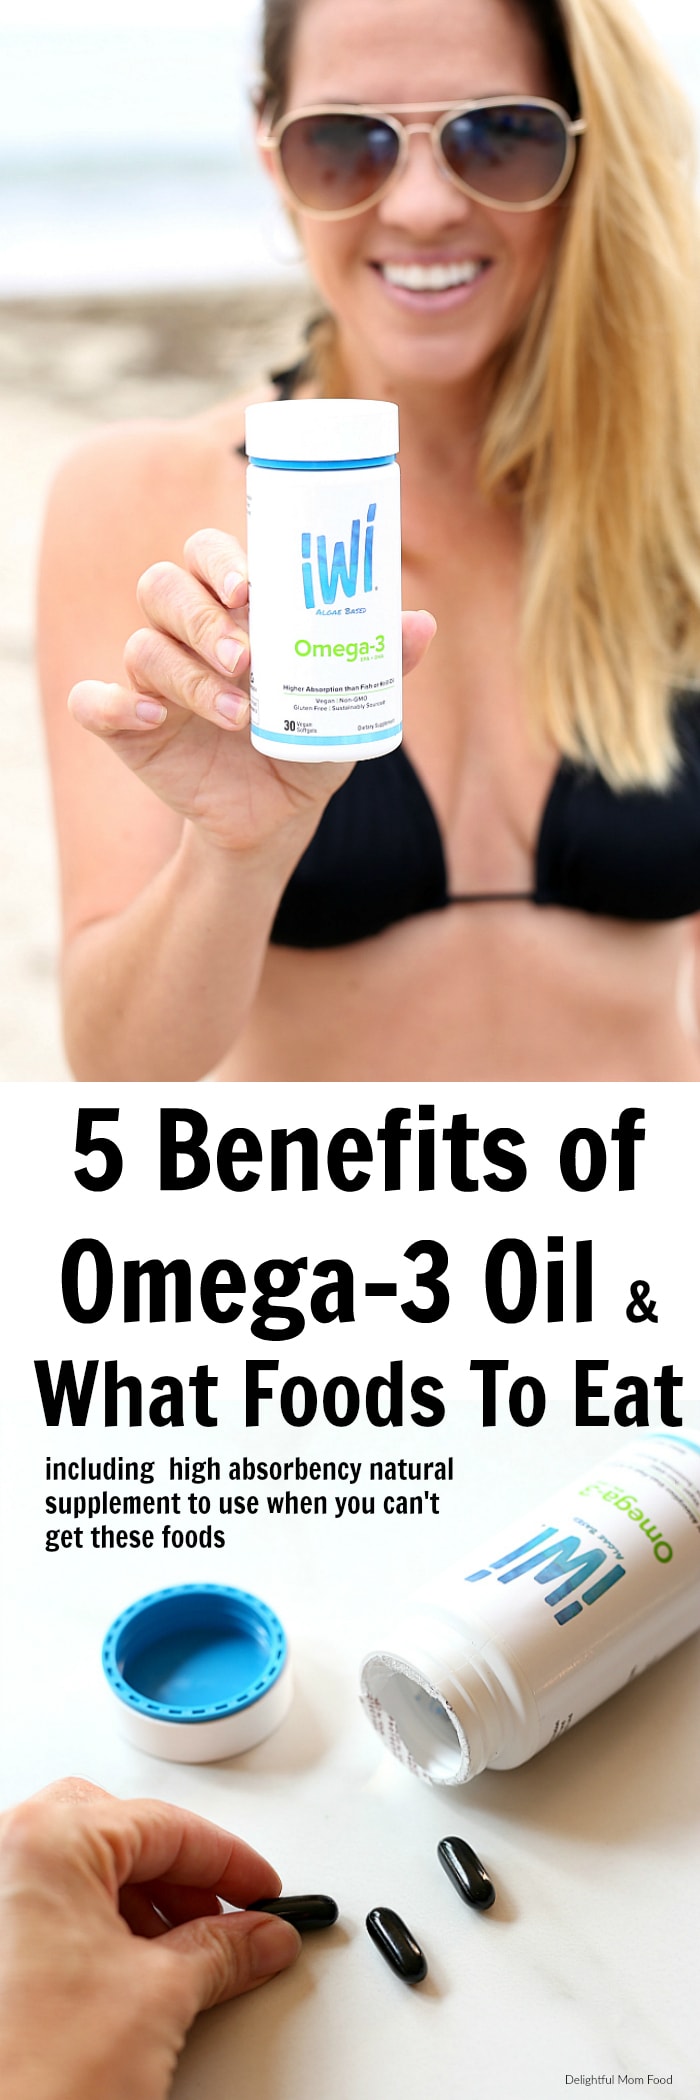 5 Health Benefits of Omega-3 Oil, EPA & DHA and what foods (and supplement) you should be eating to get these heart and brain-healthy fatty acids for optimal wellness. #omega3 #algae #healthy #supplements #ad #jointheiWitribe | delightfulmomfood.com